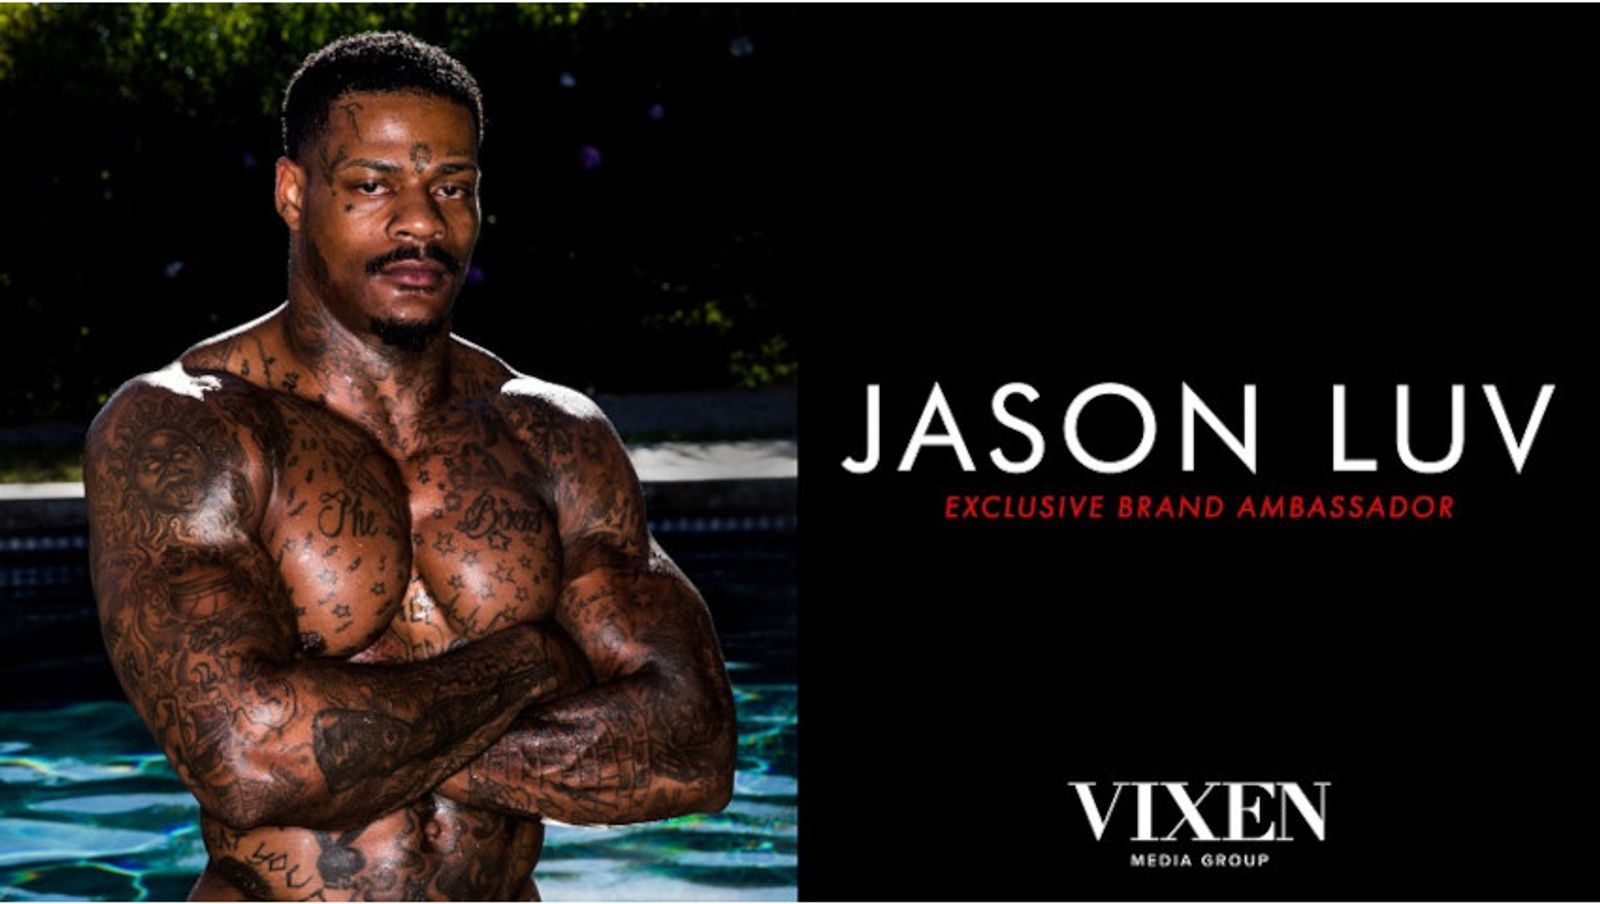 Jason Luv Signs Exclusive Deal as Brand Ambassador for VMG